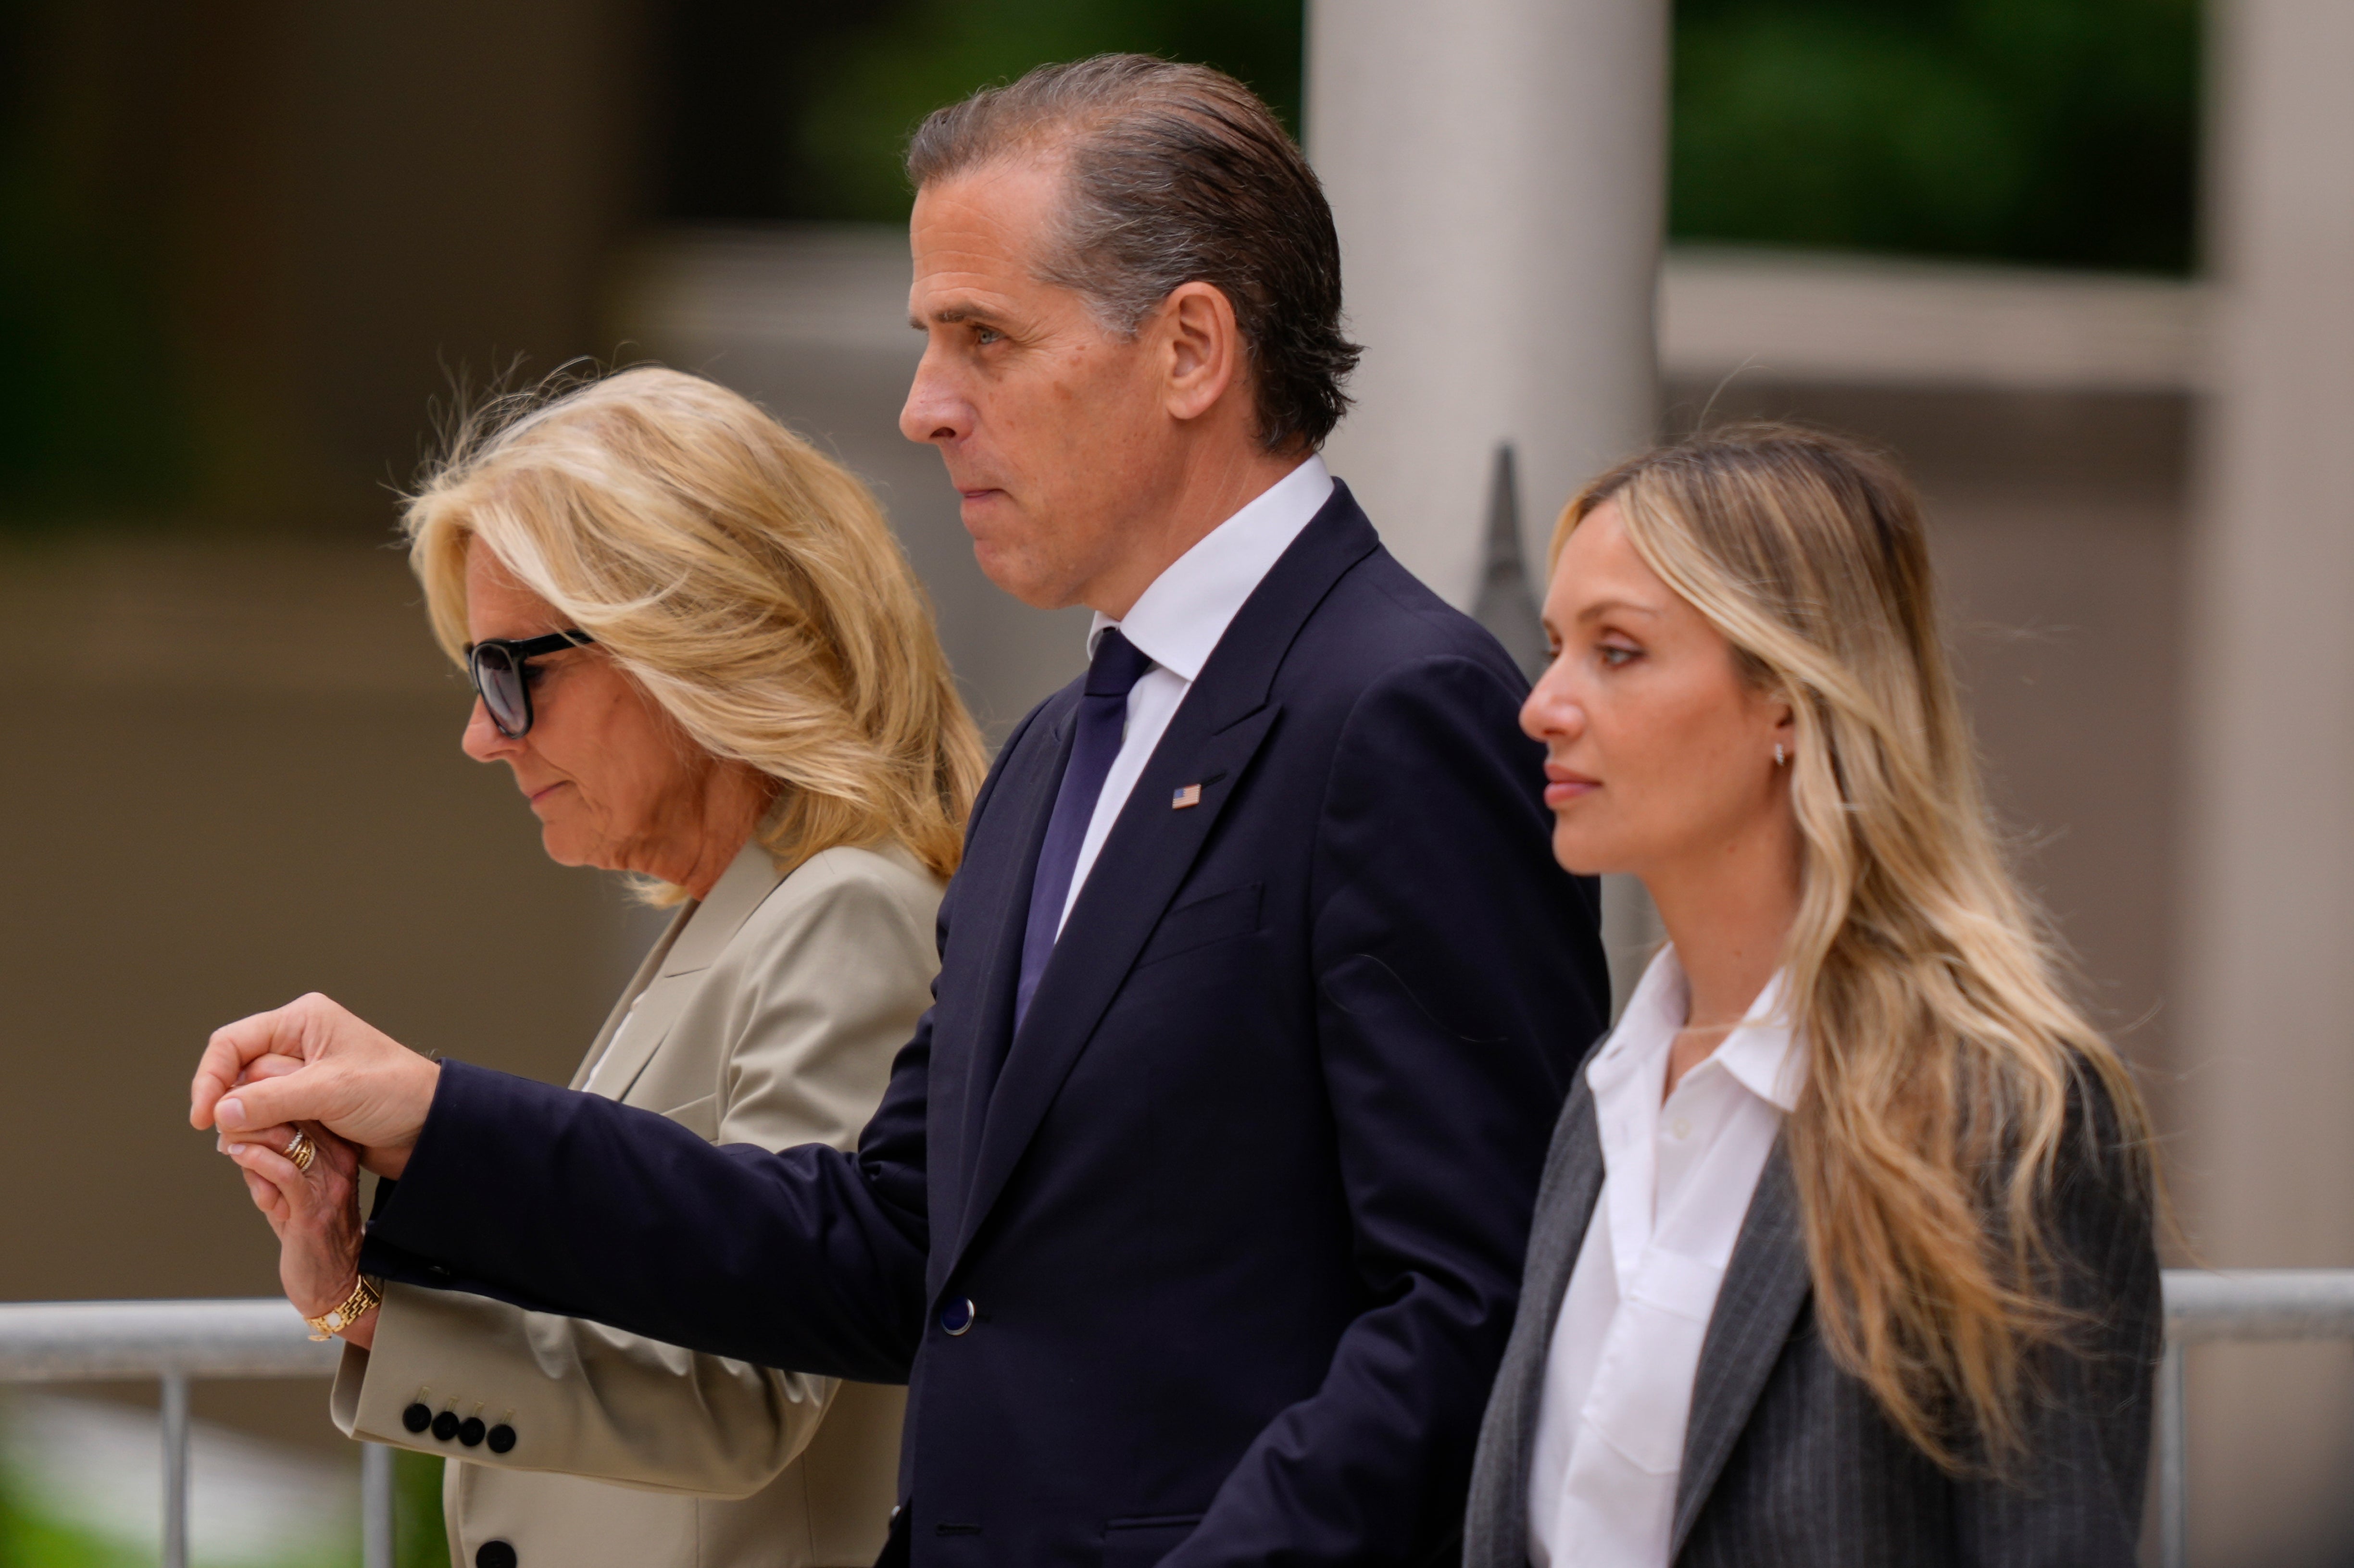 Hunter Biden leaves a federal courthouse in Delaware with his mother, First Lady Jill Biden, and wife, Melissa Cohen Biden, on June 11.